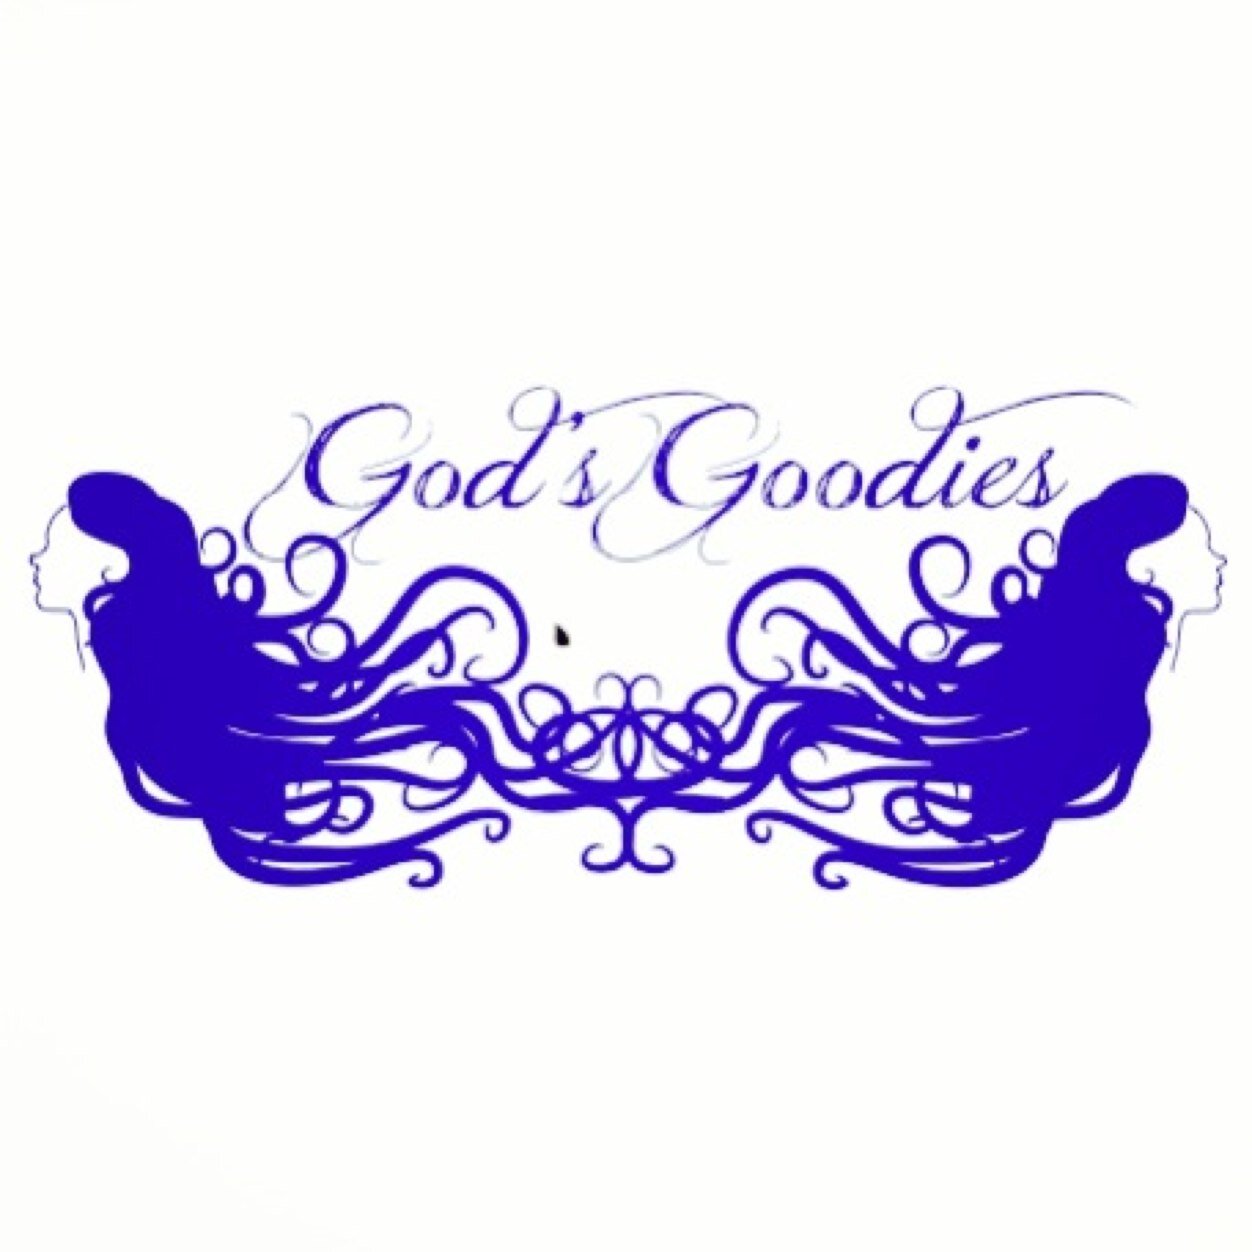 God’s Goodies! Organic Hair & Body Products Vsteams, Ionic Foot Detoxes! Herbal Baths! Cookie Wash